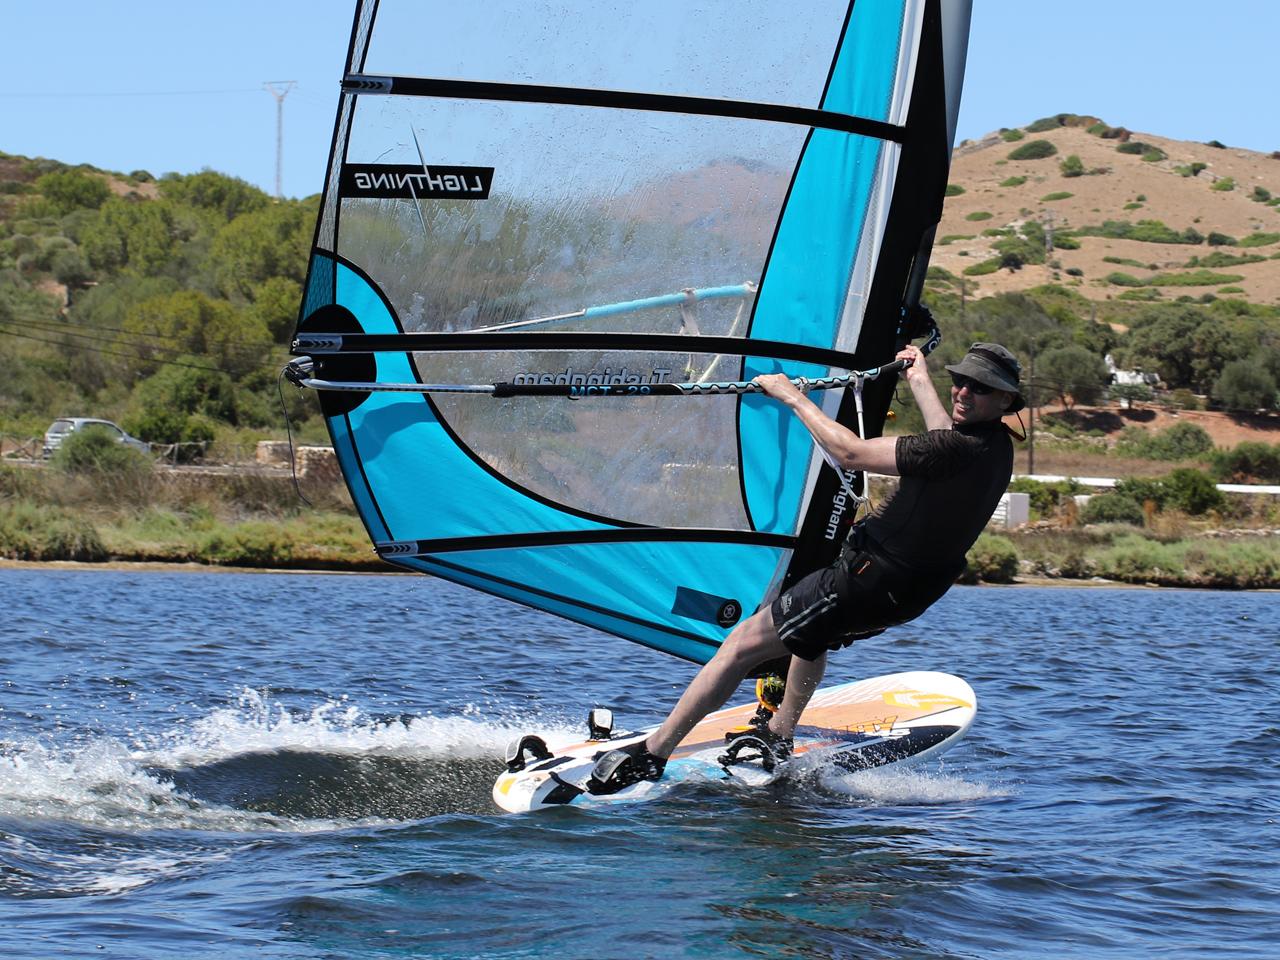 The Windsurfing Holiday